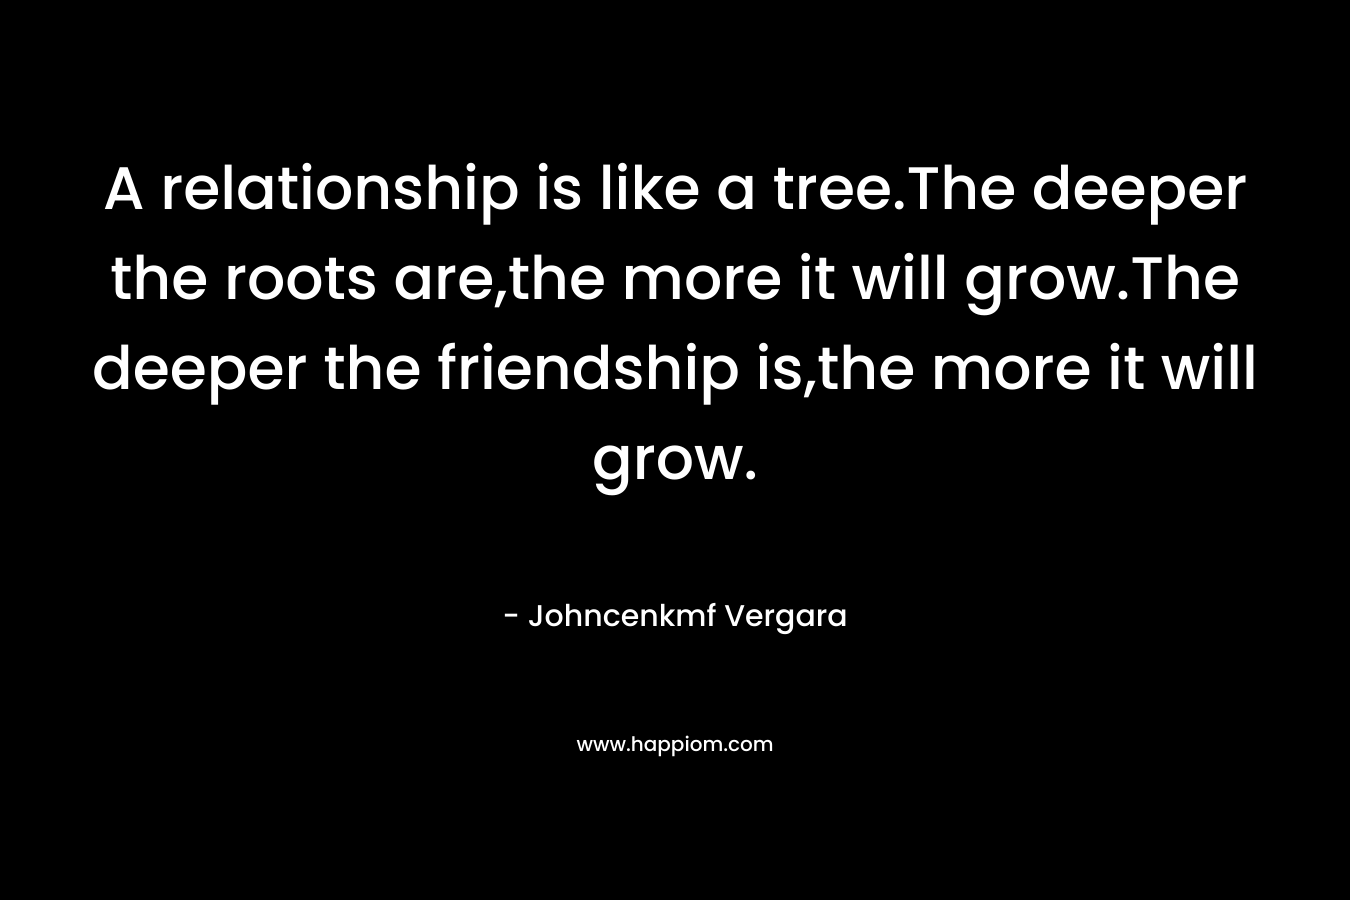 A relationship is like a tree.The deeper the roots are,the more it will grow.The deeper the friendship is,the more it will grow. – Johncenkmf Vergara